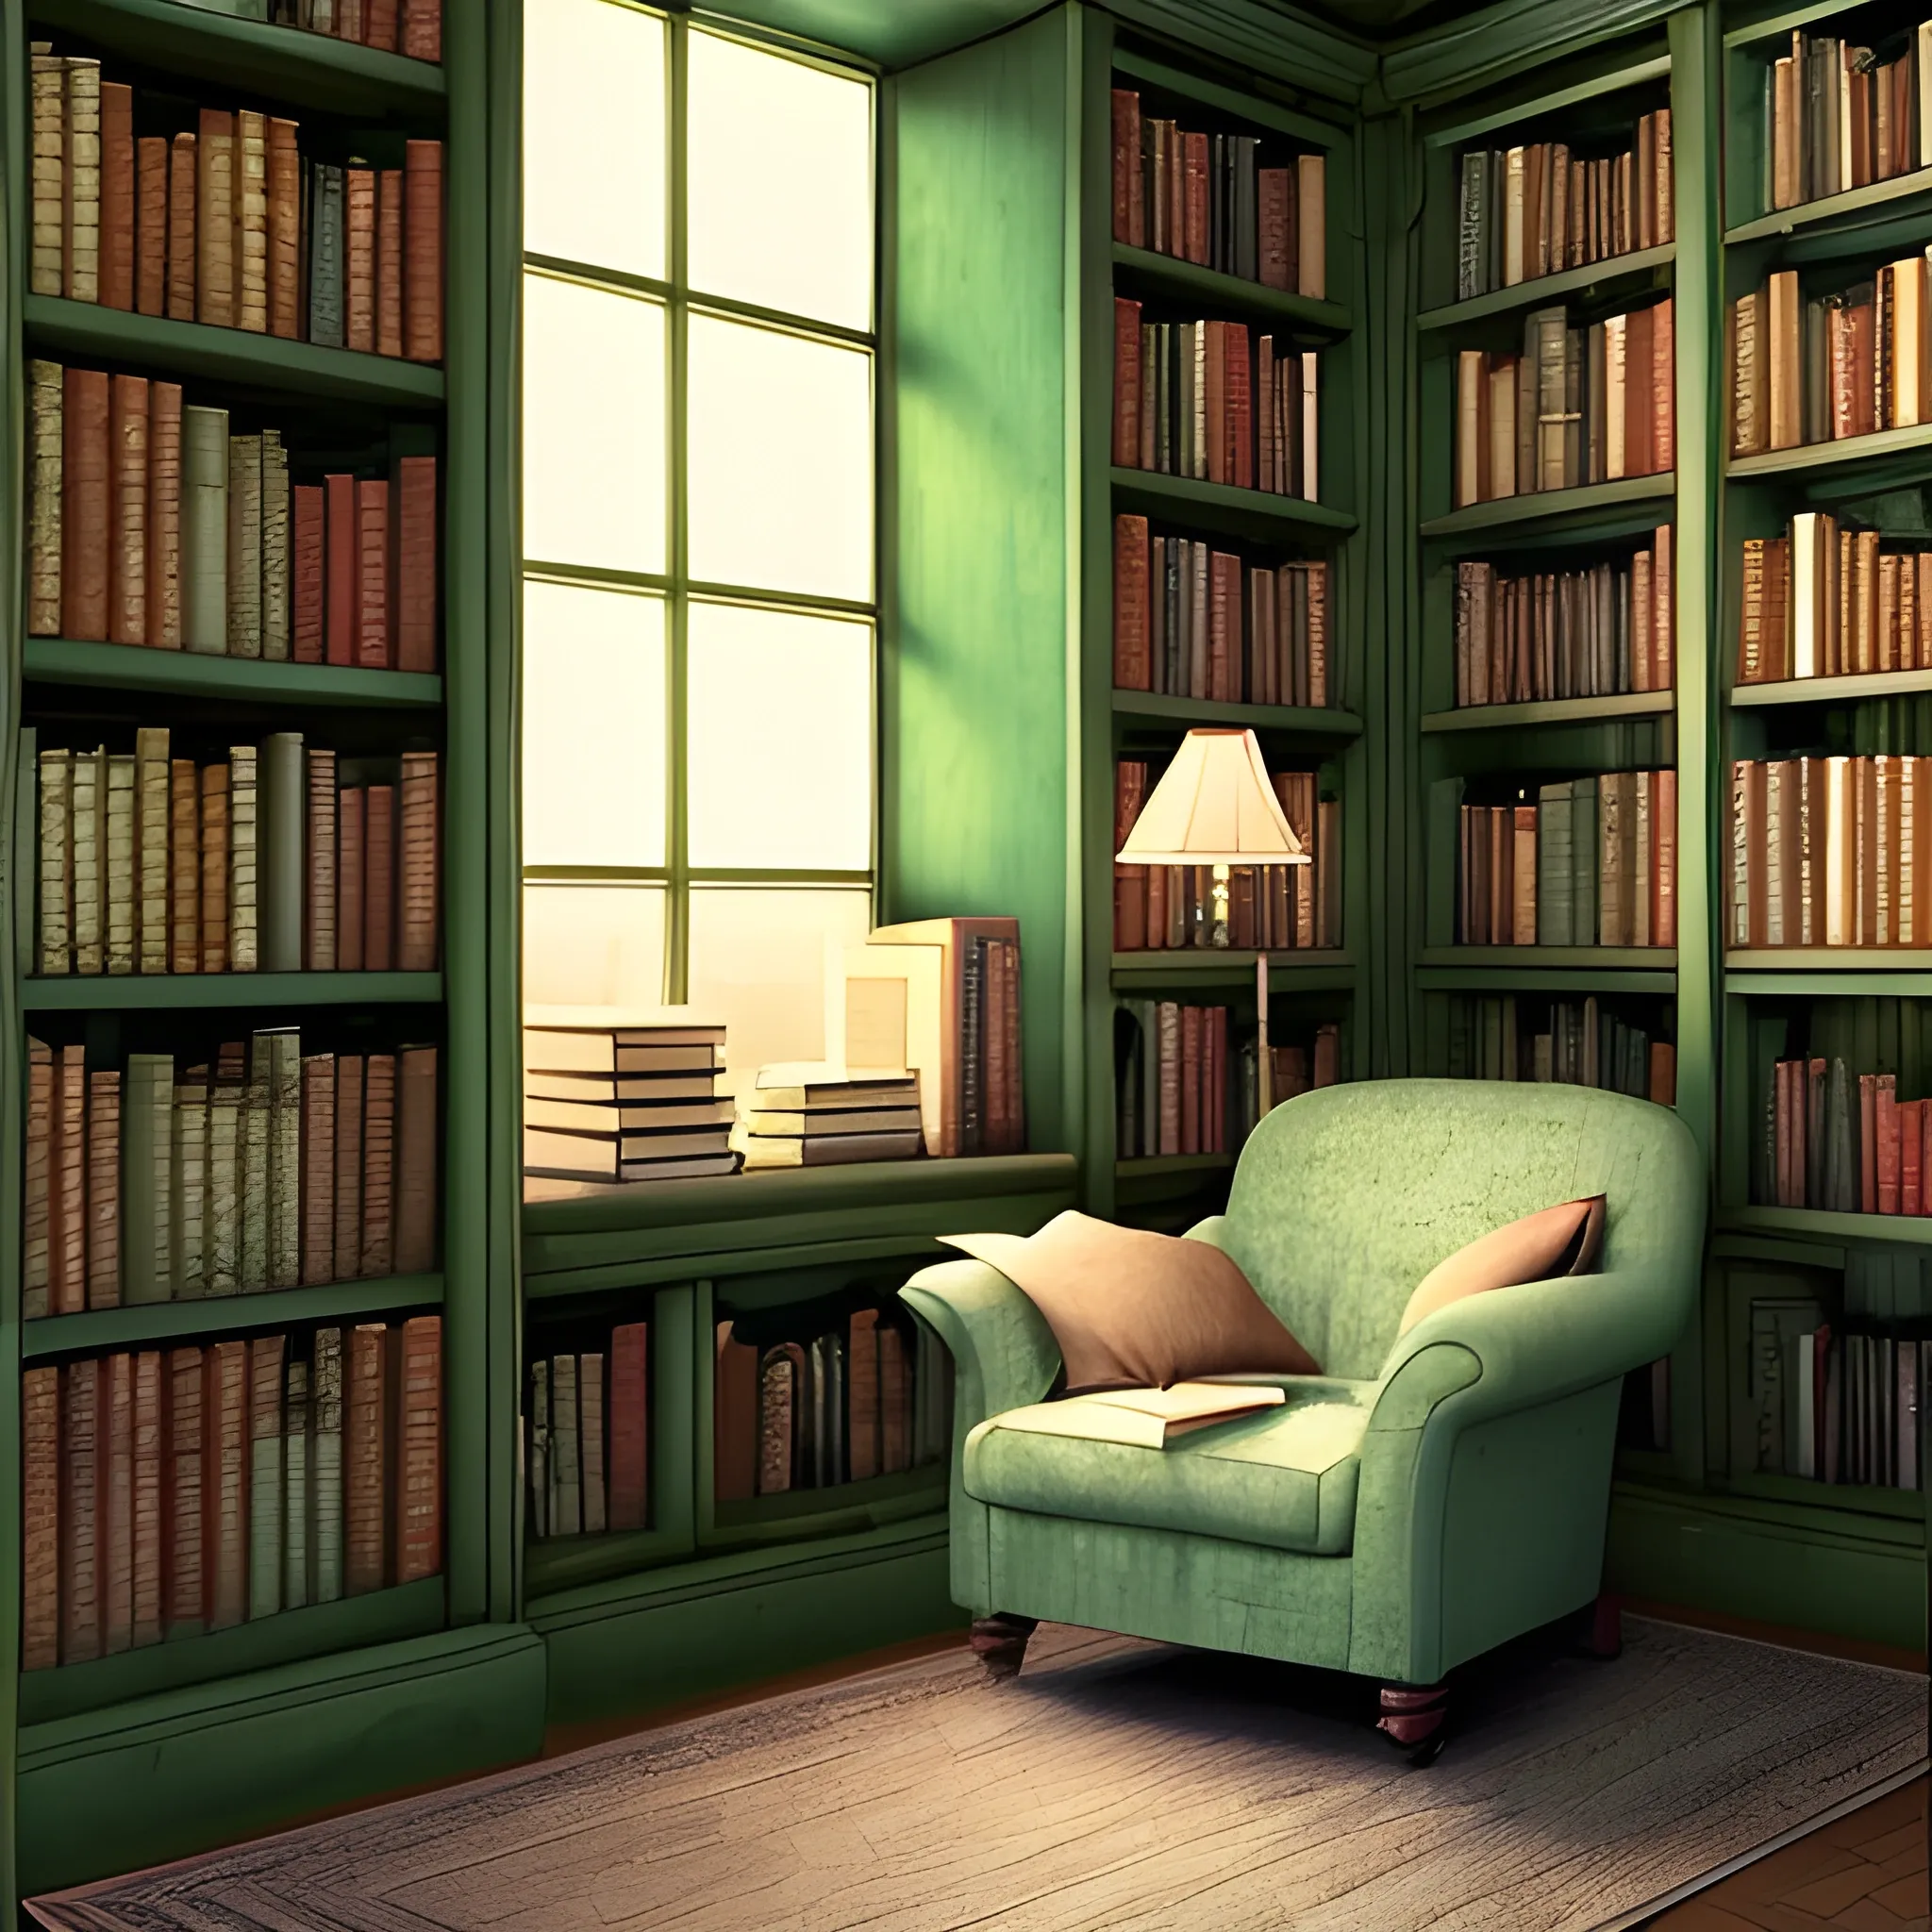 This is a background image for a reading blog. Create an image with a cozy library atmosphere filled with books